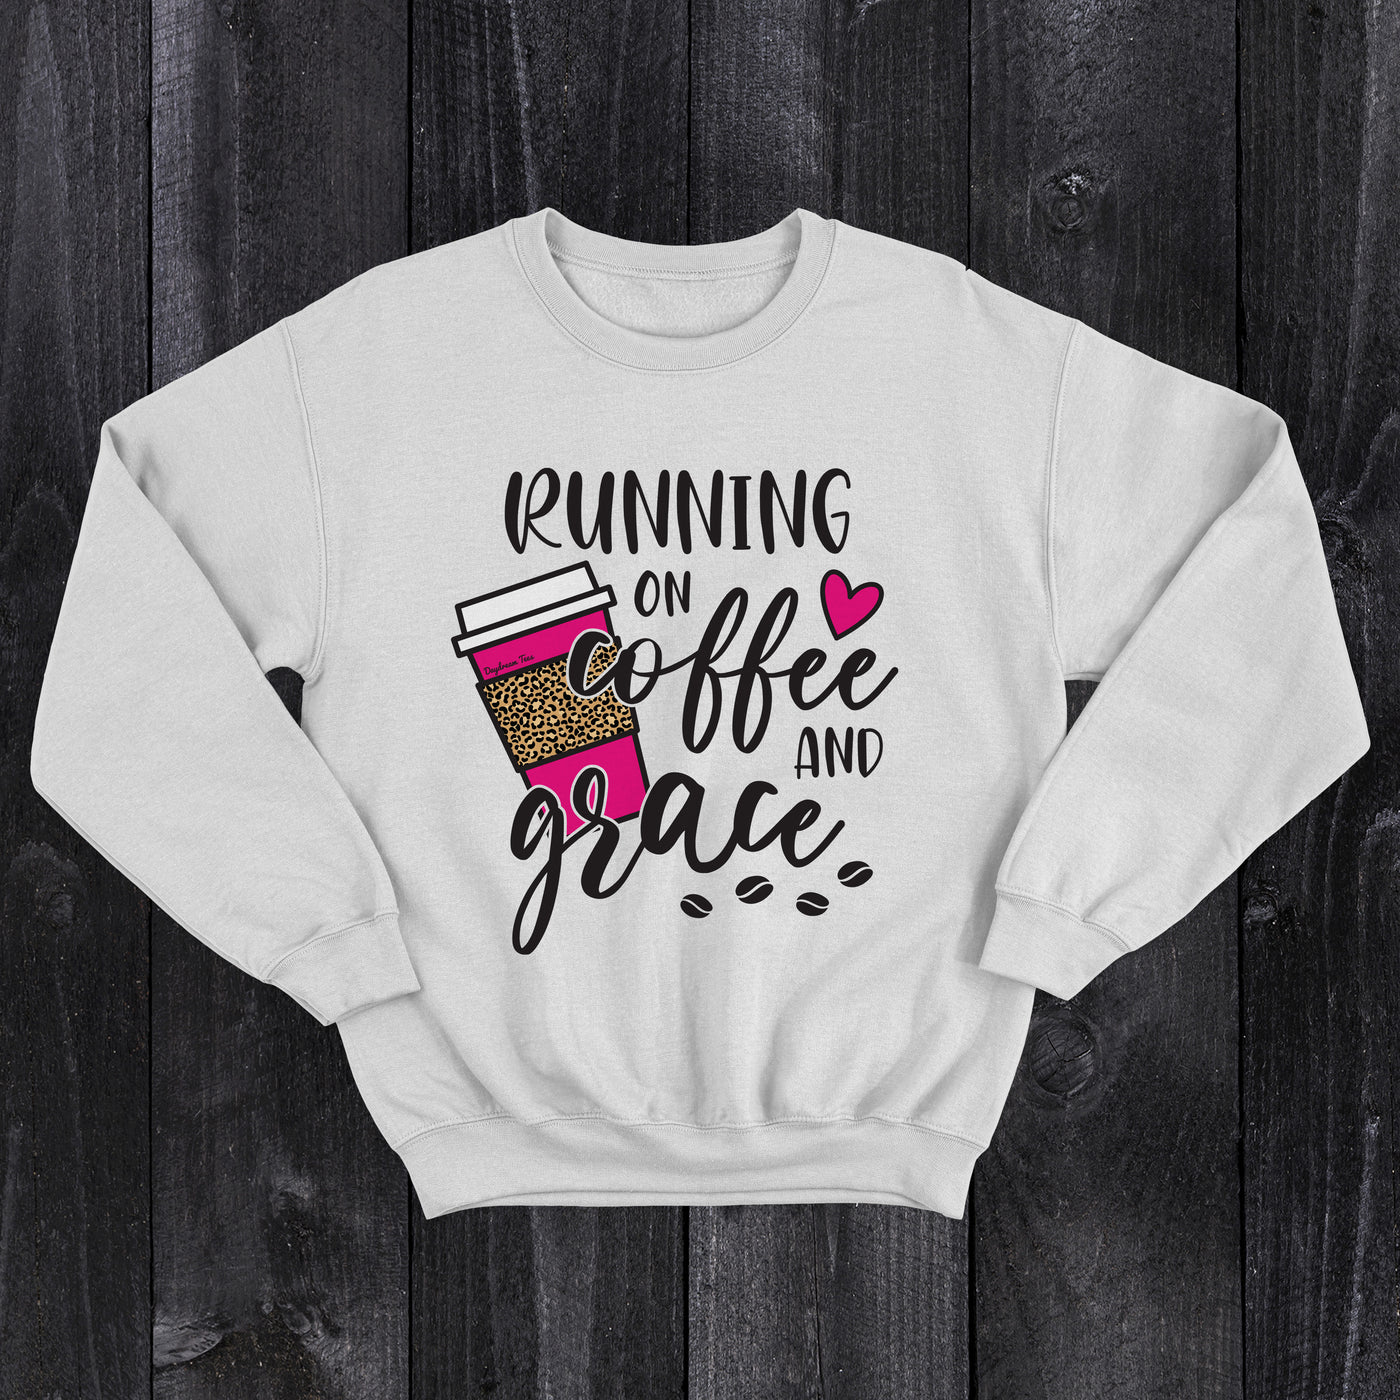 Daydream Tees Running on Coffee and Grace